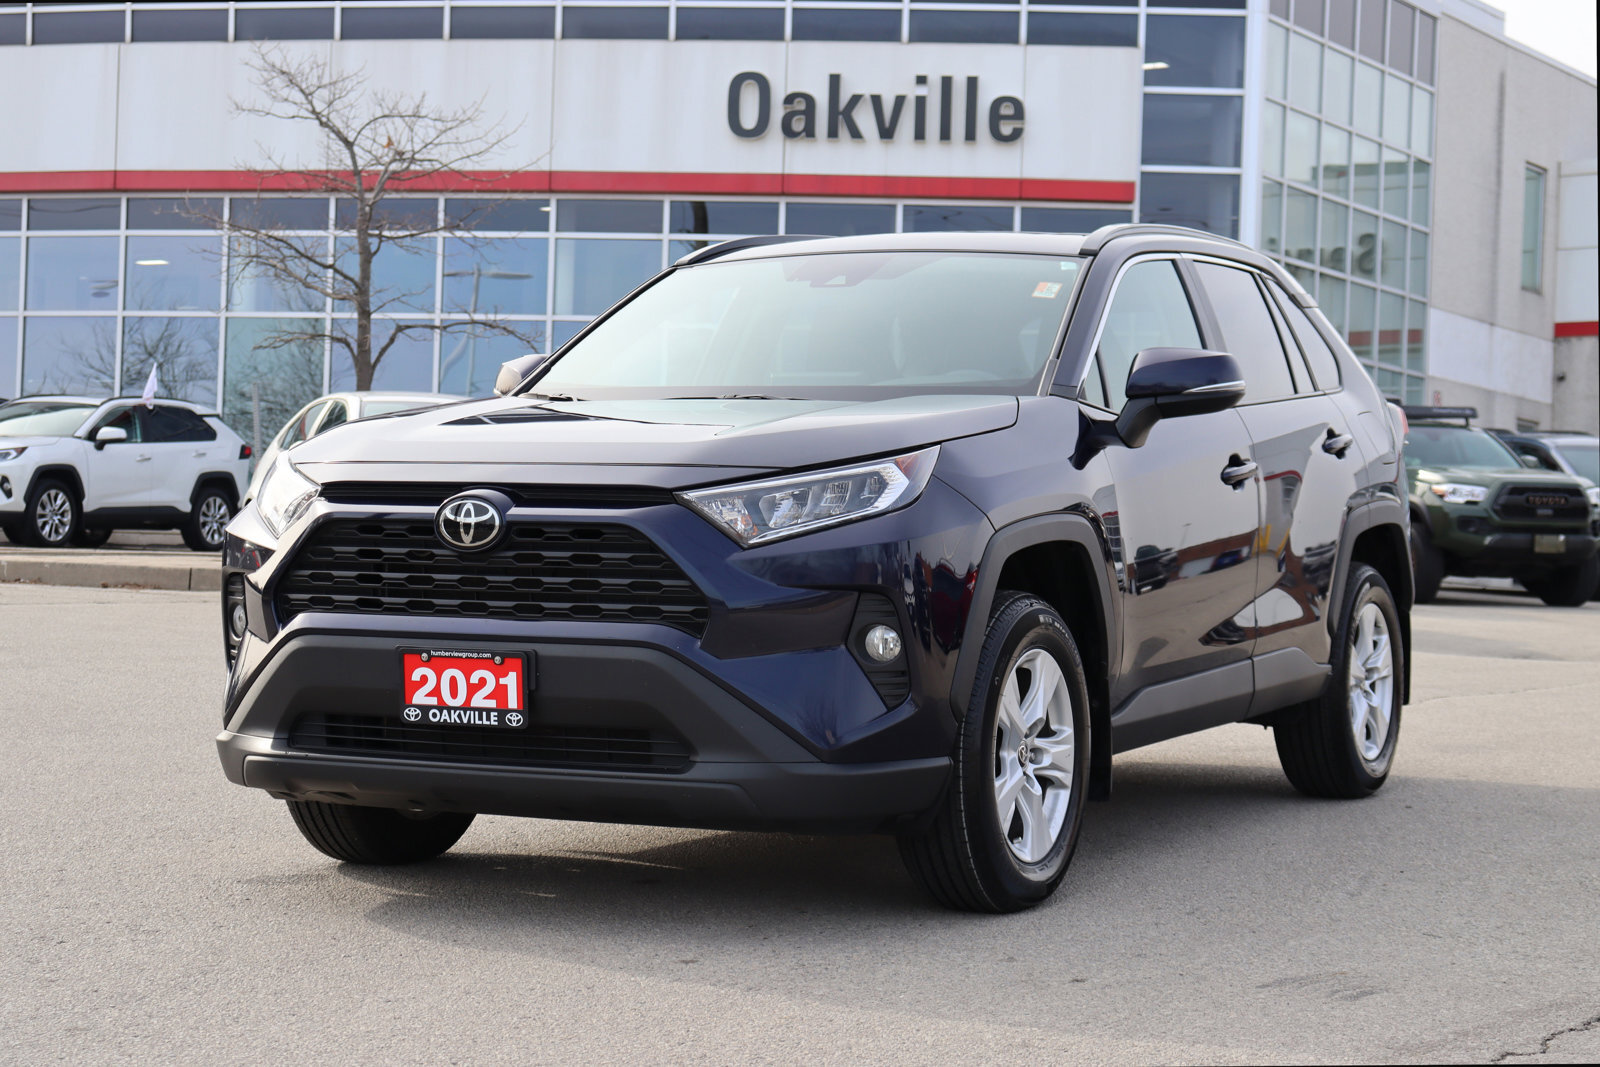 2021 Toyota RAV4 XLE AWD Clean Carfax One Owner Lease Trade-in